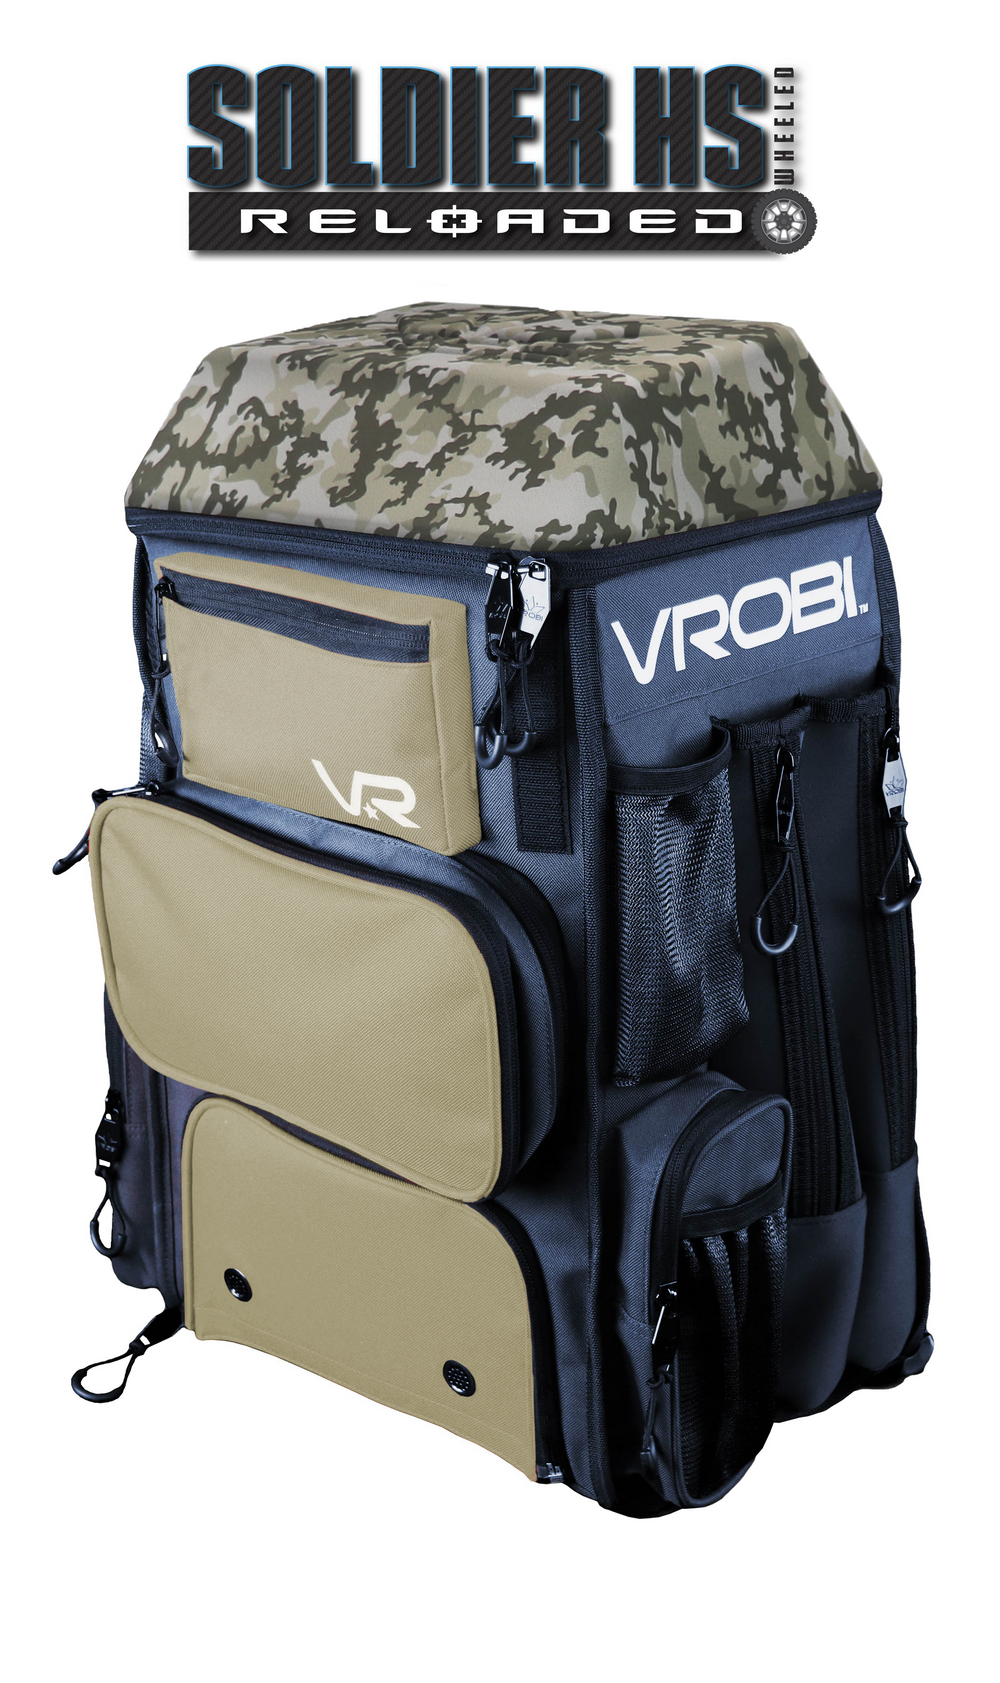 SOLDIER HS RELOADED ARMY WOODLAND CAMO WHEELED BAG